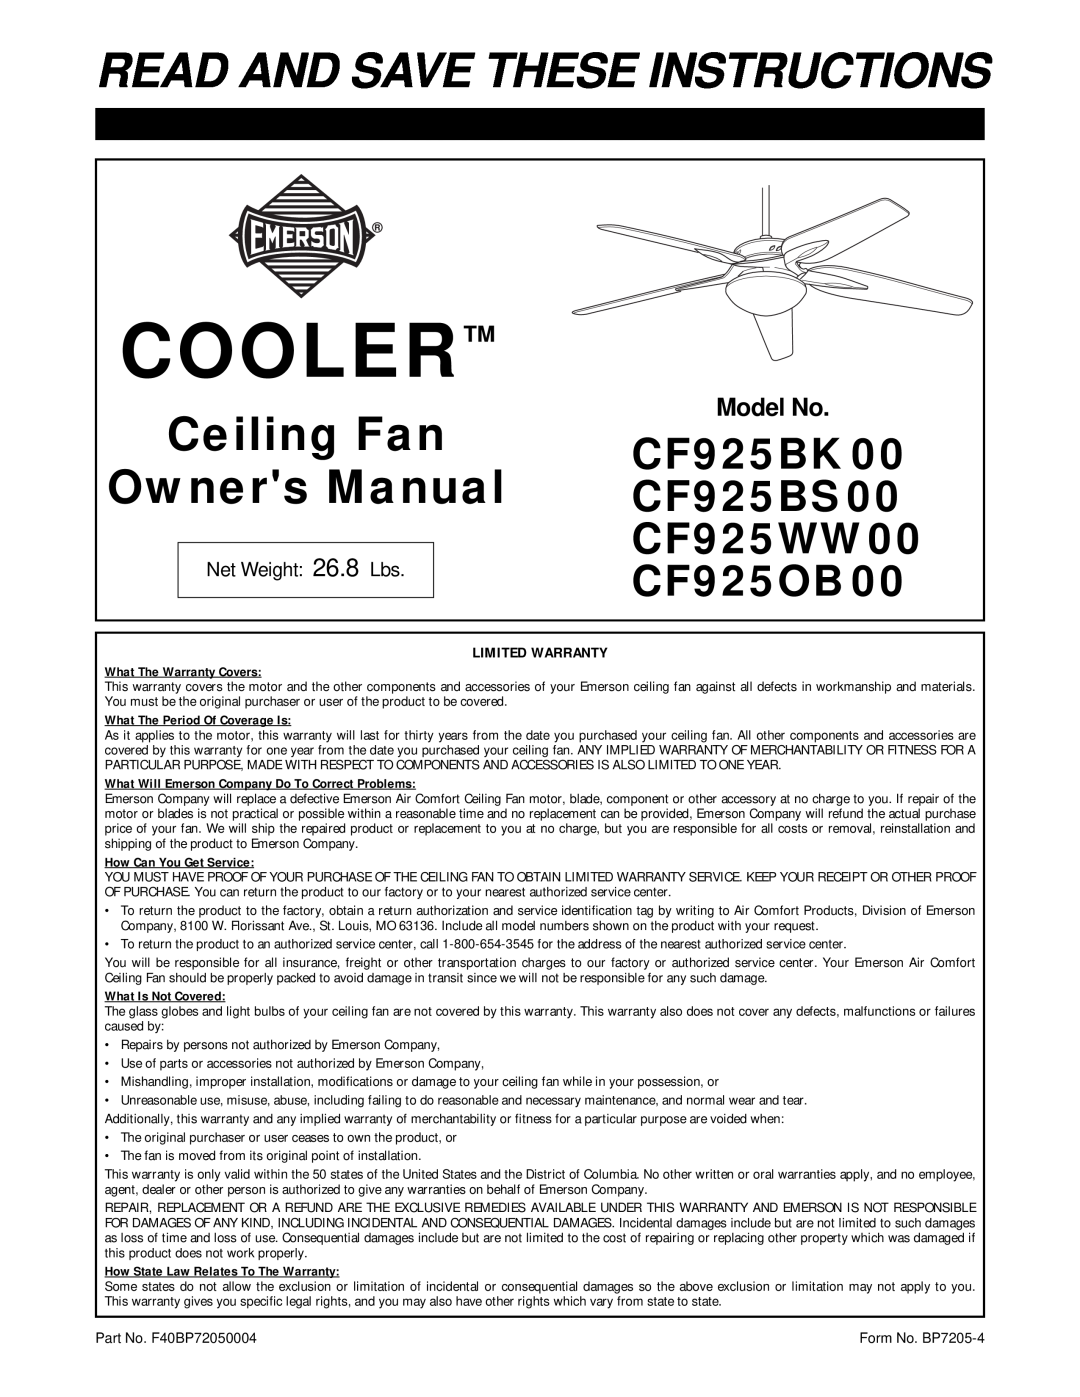 Emerson CF925WW00 warranty Model No, Cooler, Read And Save These Instructions, Ceiling Fan, CF925BK, CF925BS, CF925OB 